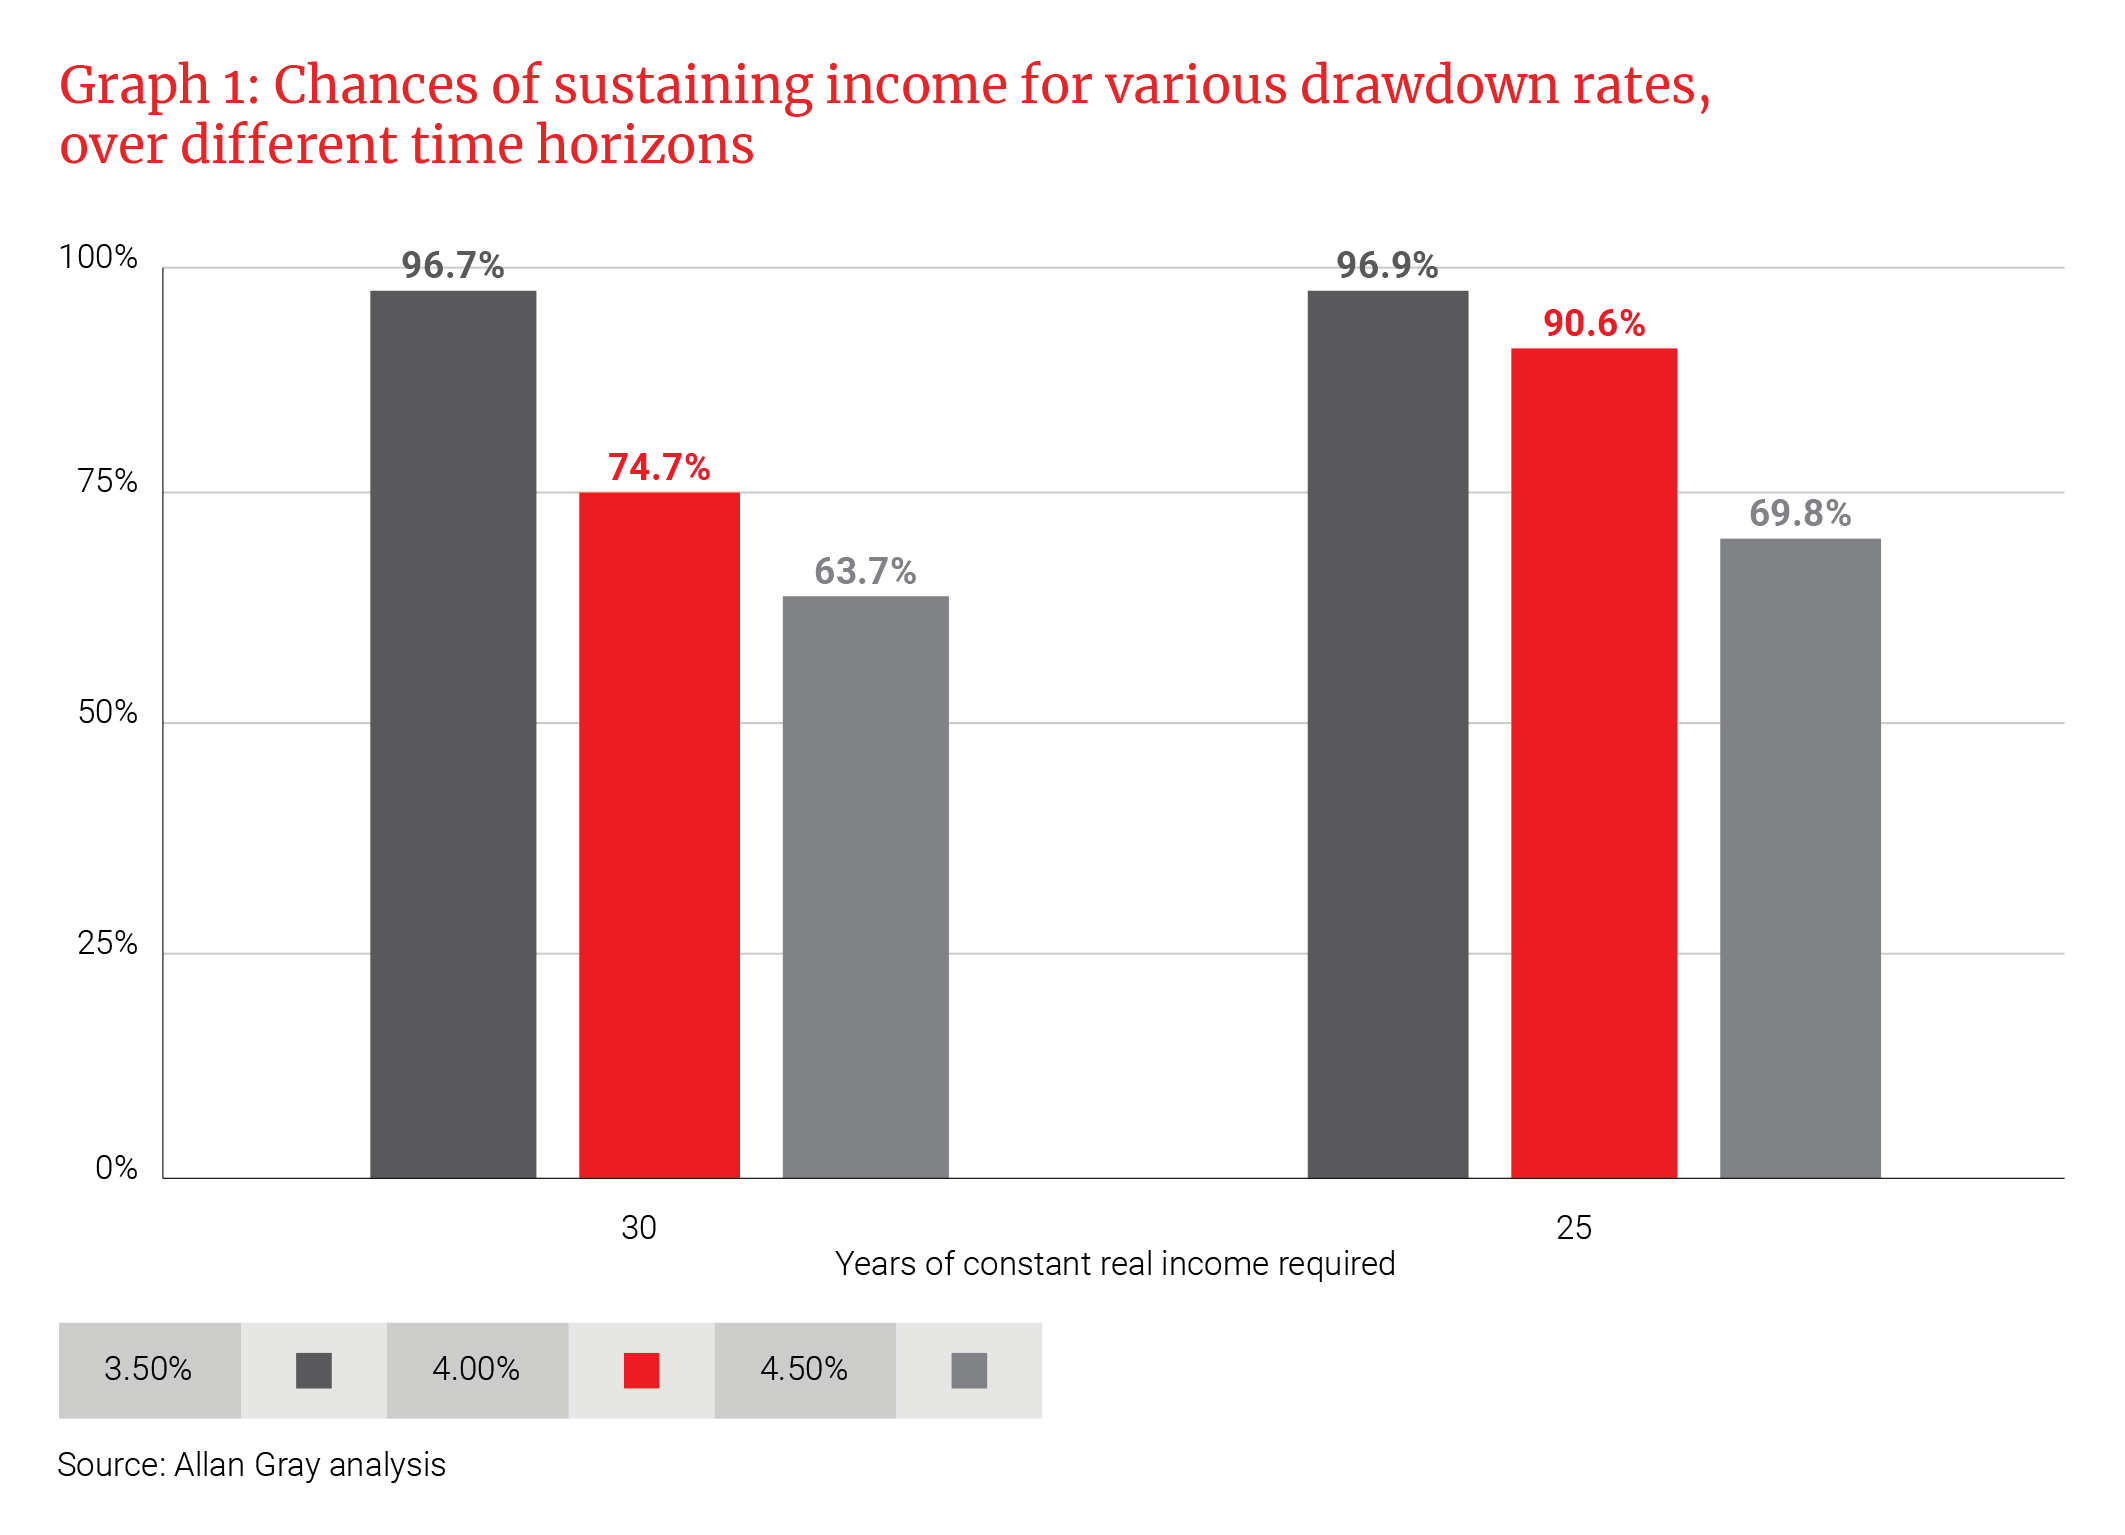 Chances of sustaining income for various drawdown rates, over different time horizons - Allan Gray